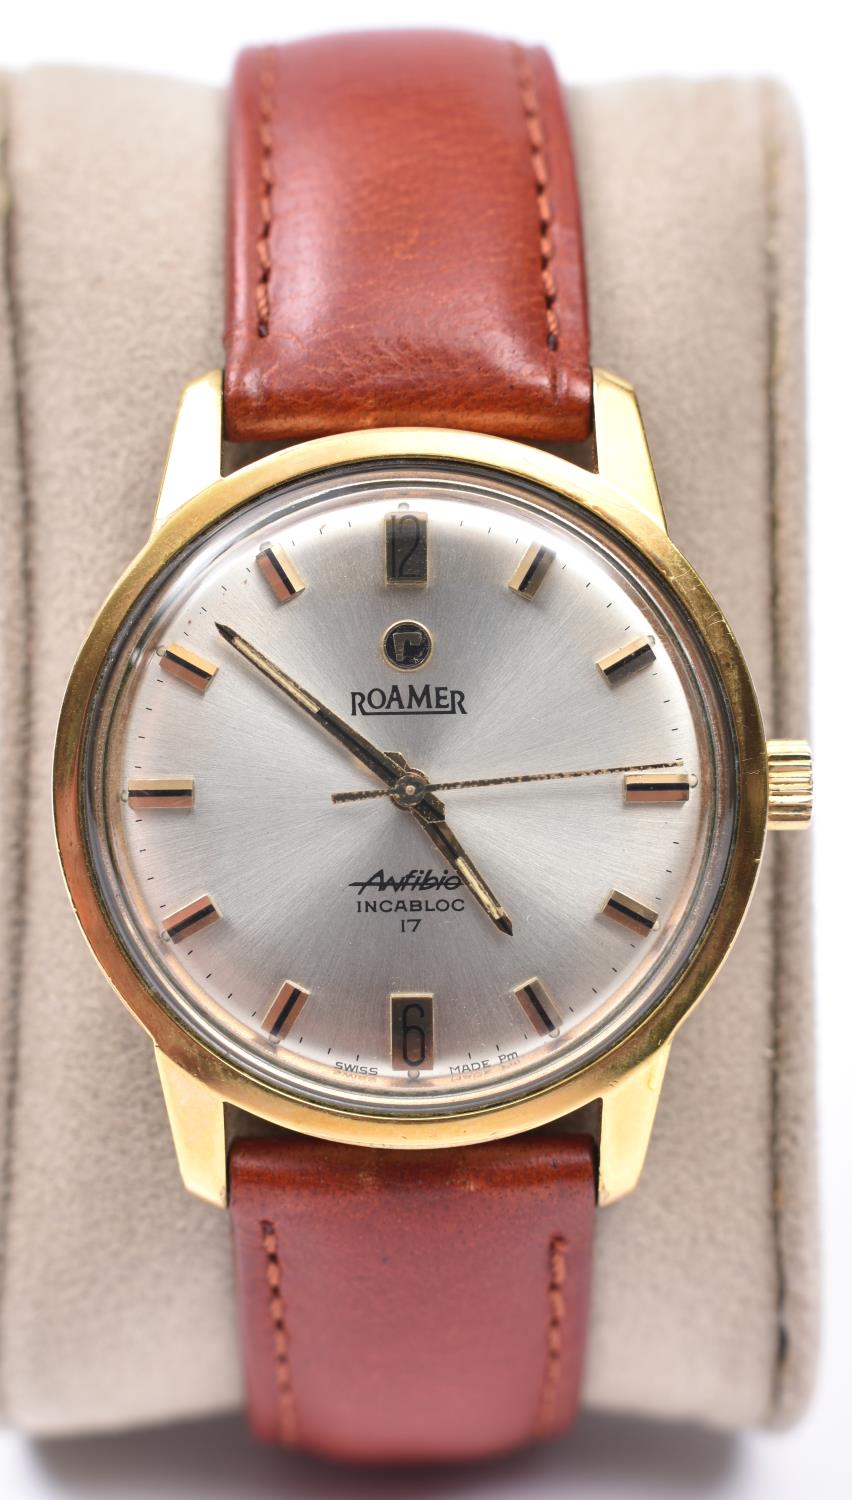 A Roamer Anfibio Incabloc 17 watch with manual winding mechanism. Stainless steel case, metallic